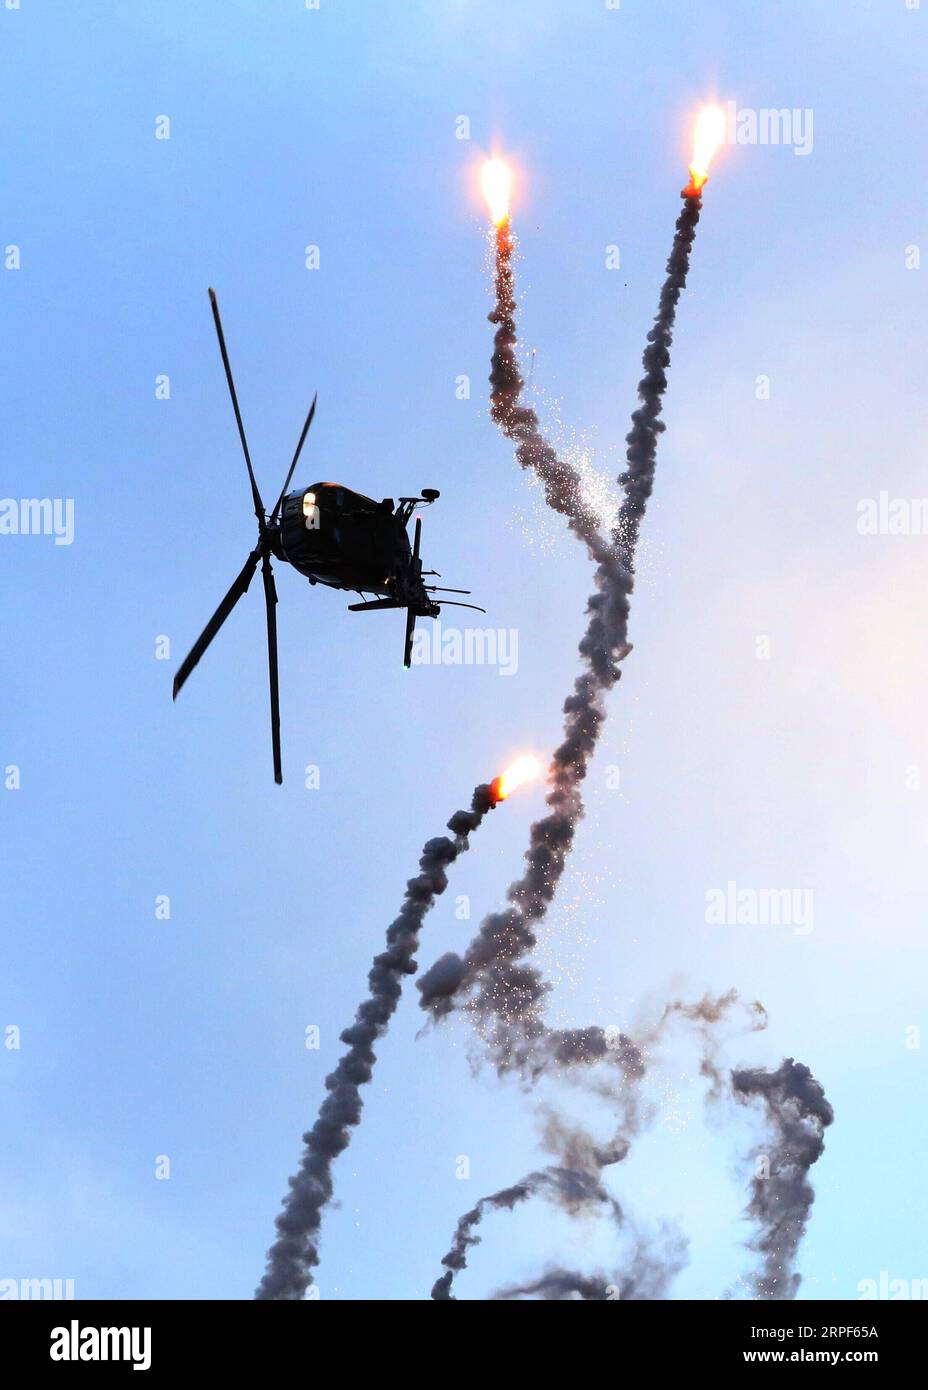 (190914) -- BRUSSELS, Sept. 14, 2019 -- A helicopter Agusta A-109 of the Belgian Air Force flies at the Sanicole Sunset Airshow in Hechtel, Belgium, Sept. 13, 2019. ) BELGIUM-SANICOLE SUNSET AIRSHOW WangxXiaojun PUBLICATIONxNOTxINxCHN Stock Photo